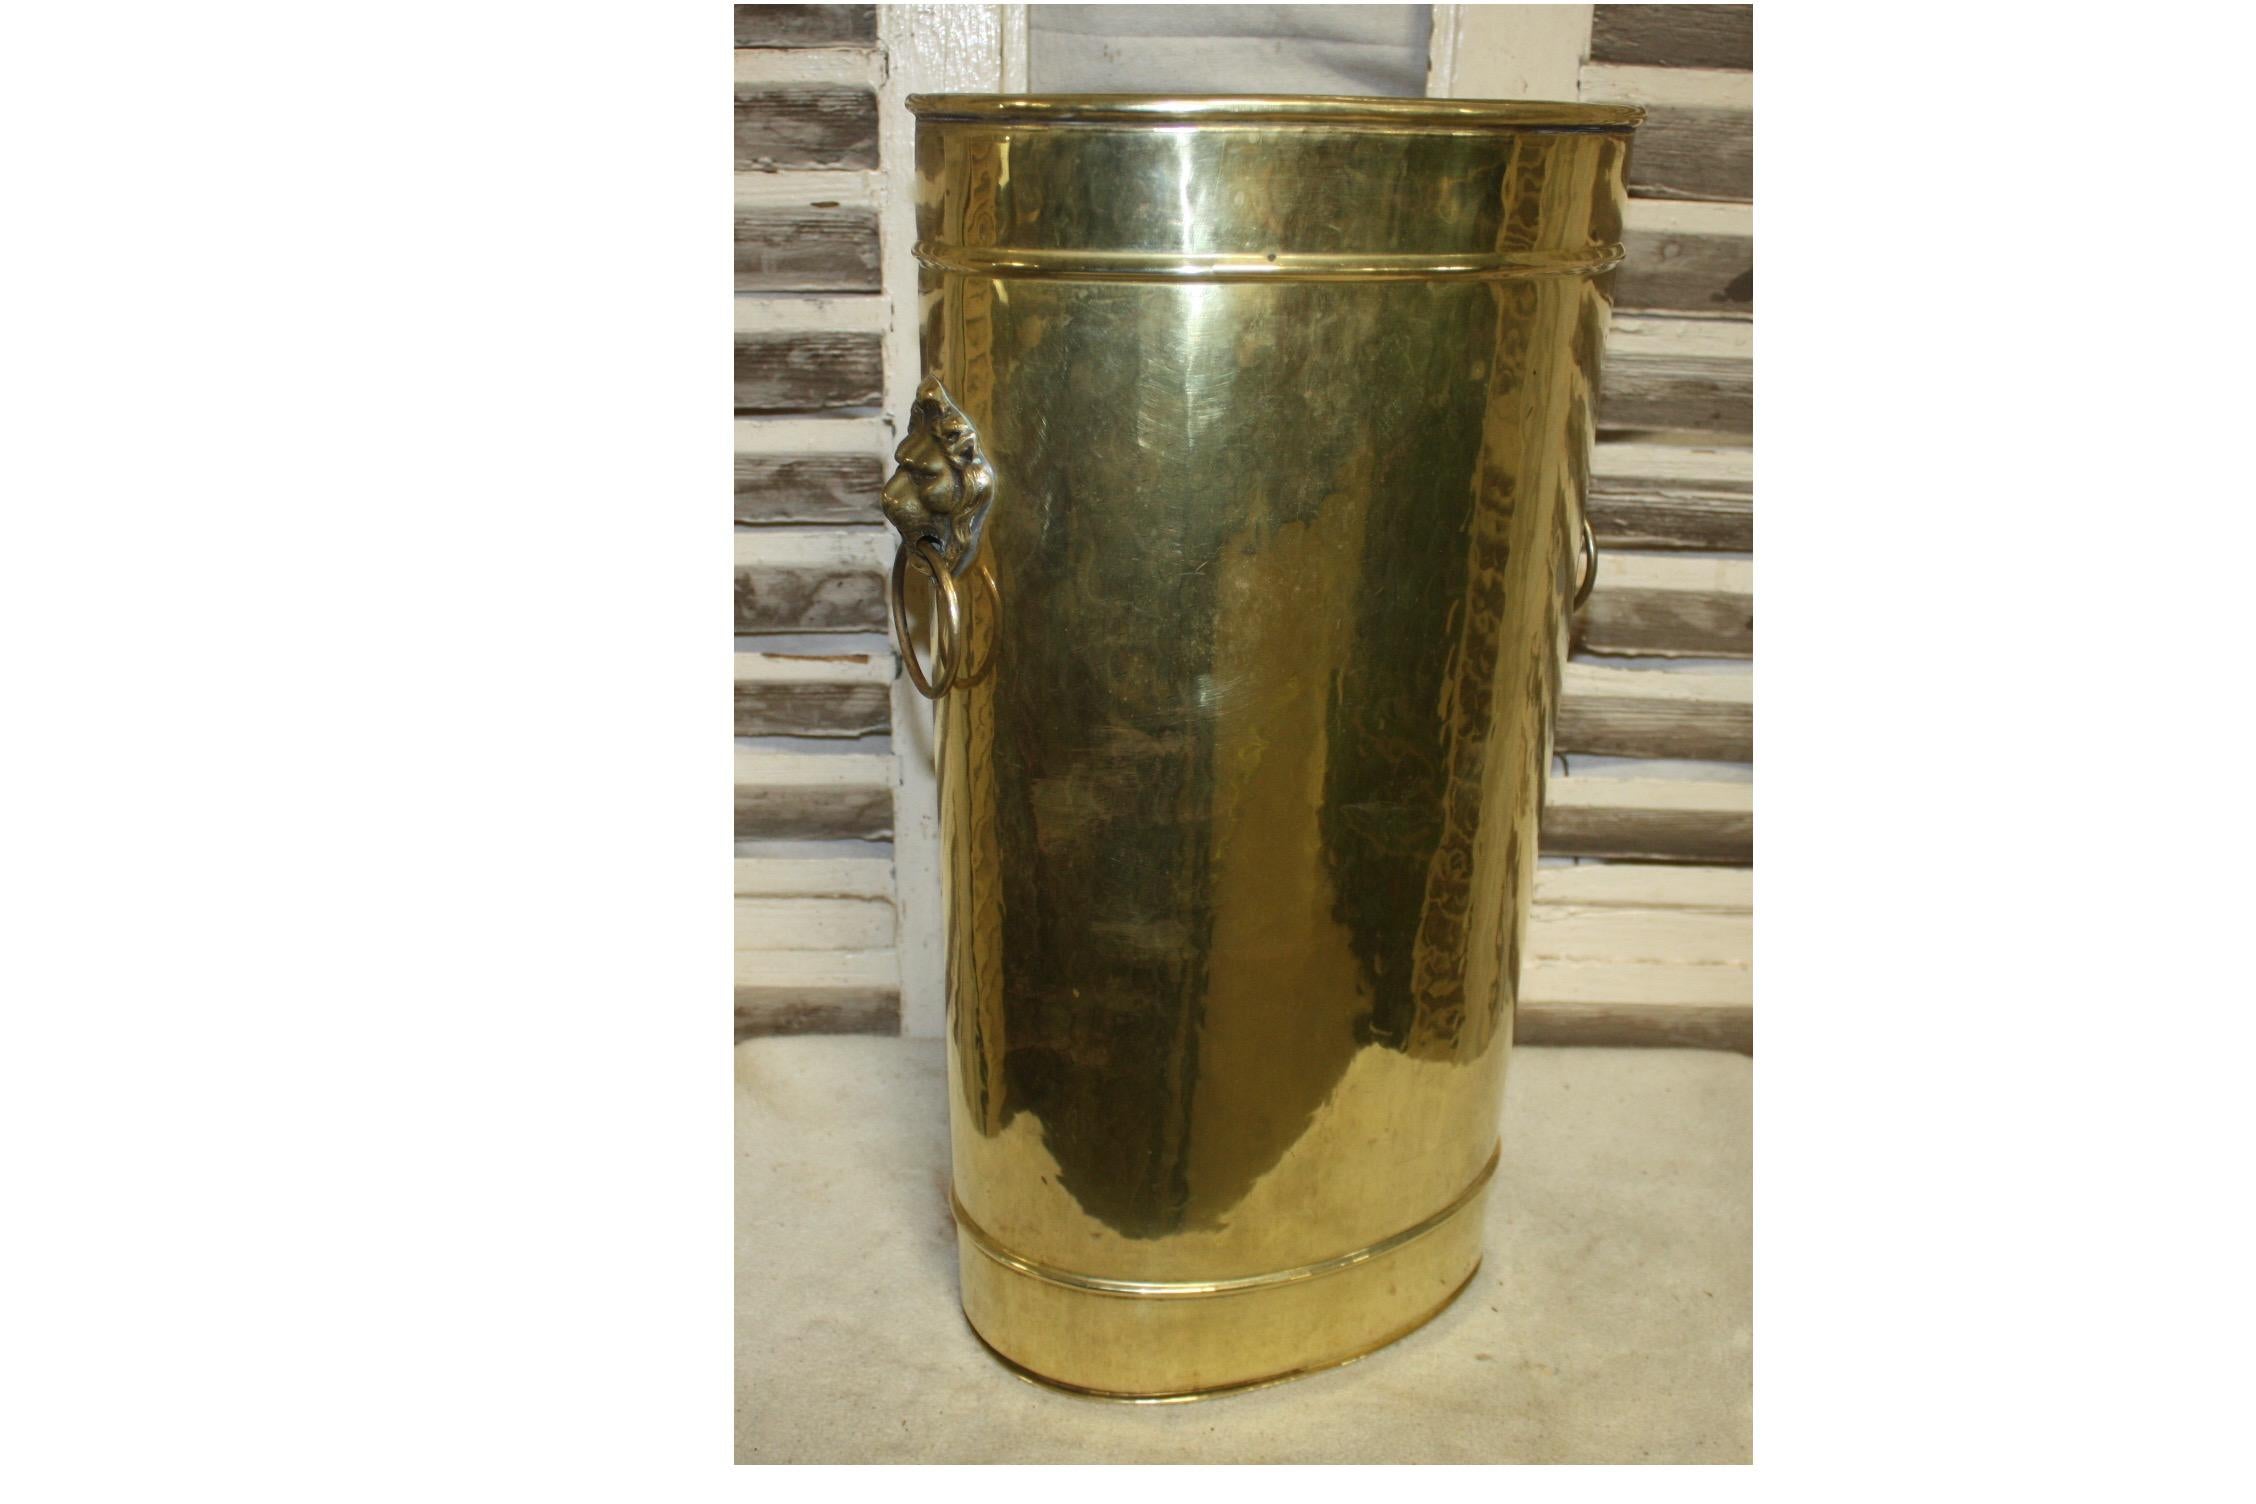 French Empire Period Wastepaper Basket In Good Condition For Sale In Stockbridge, GA